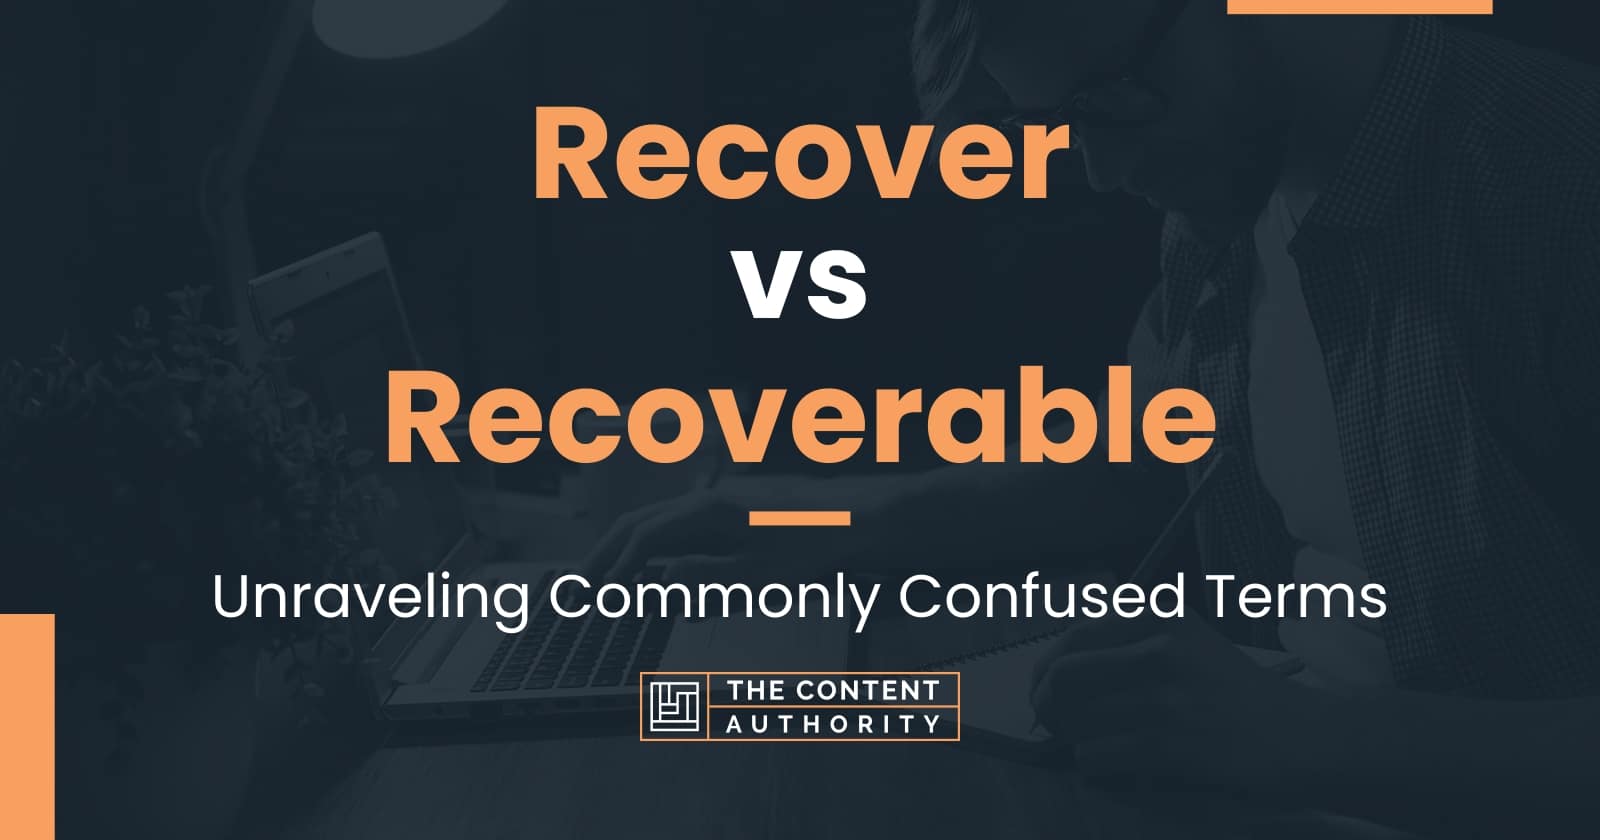 Recover vs Recoverable Unraveling Commonly Confused Terms